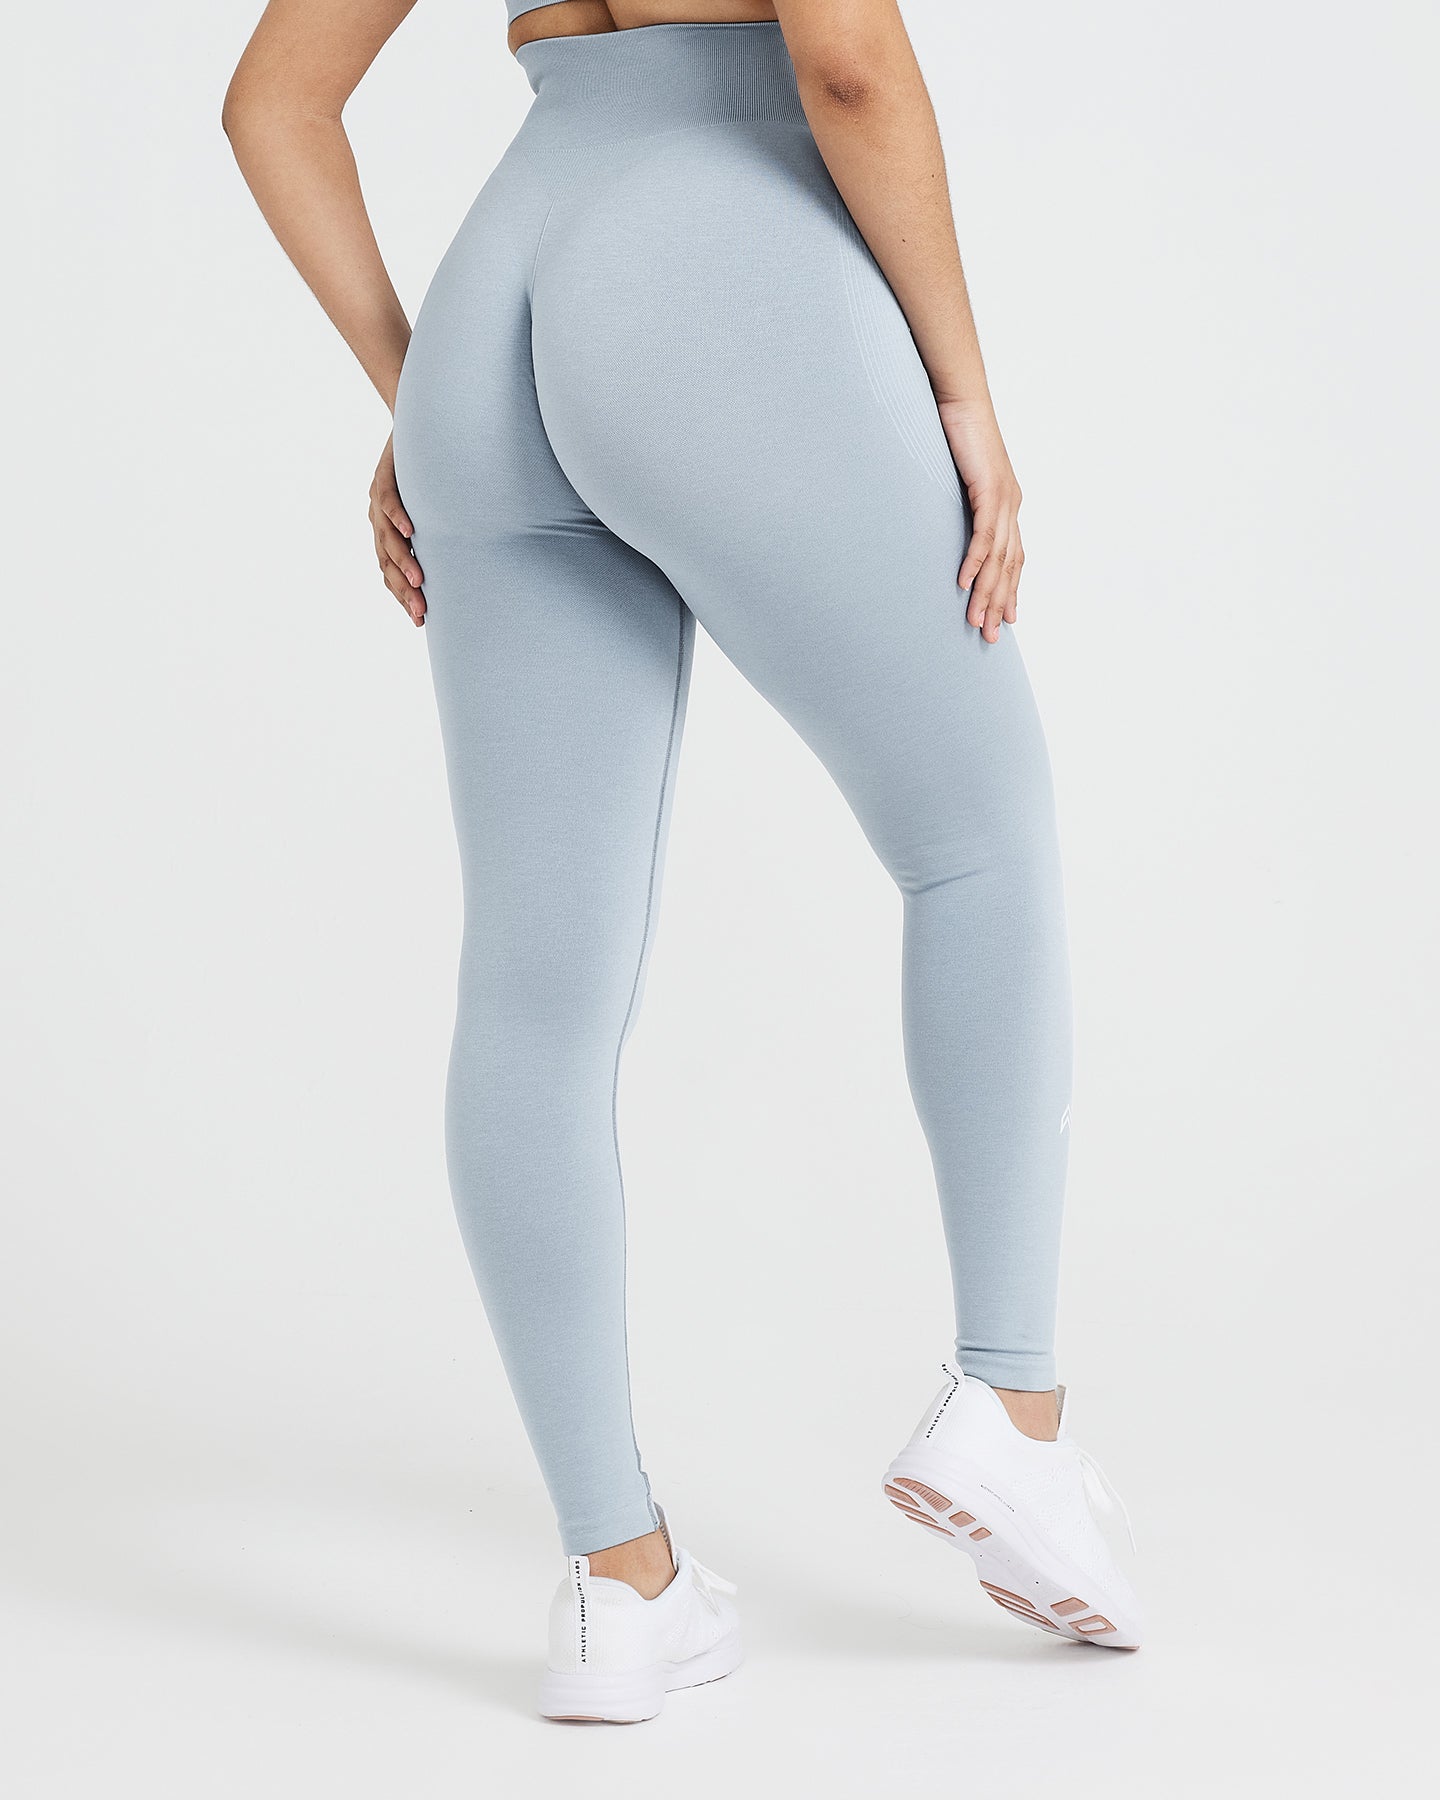 IRRESISTIBLY SOFT Gray Leggings – Witoutlimits_athletic